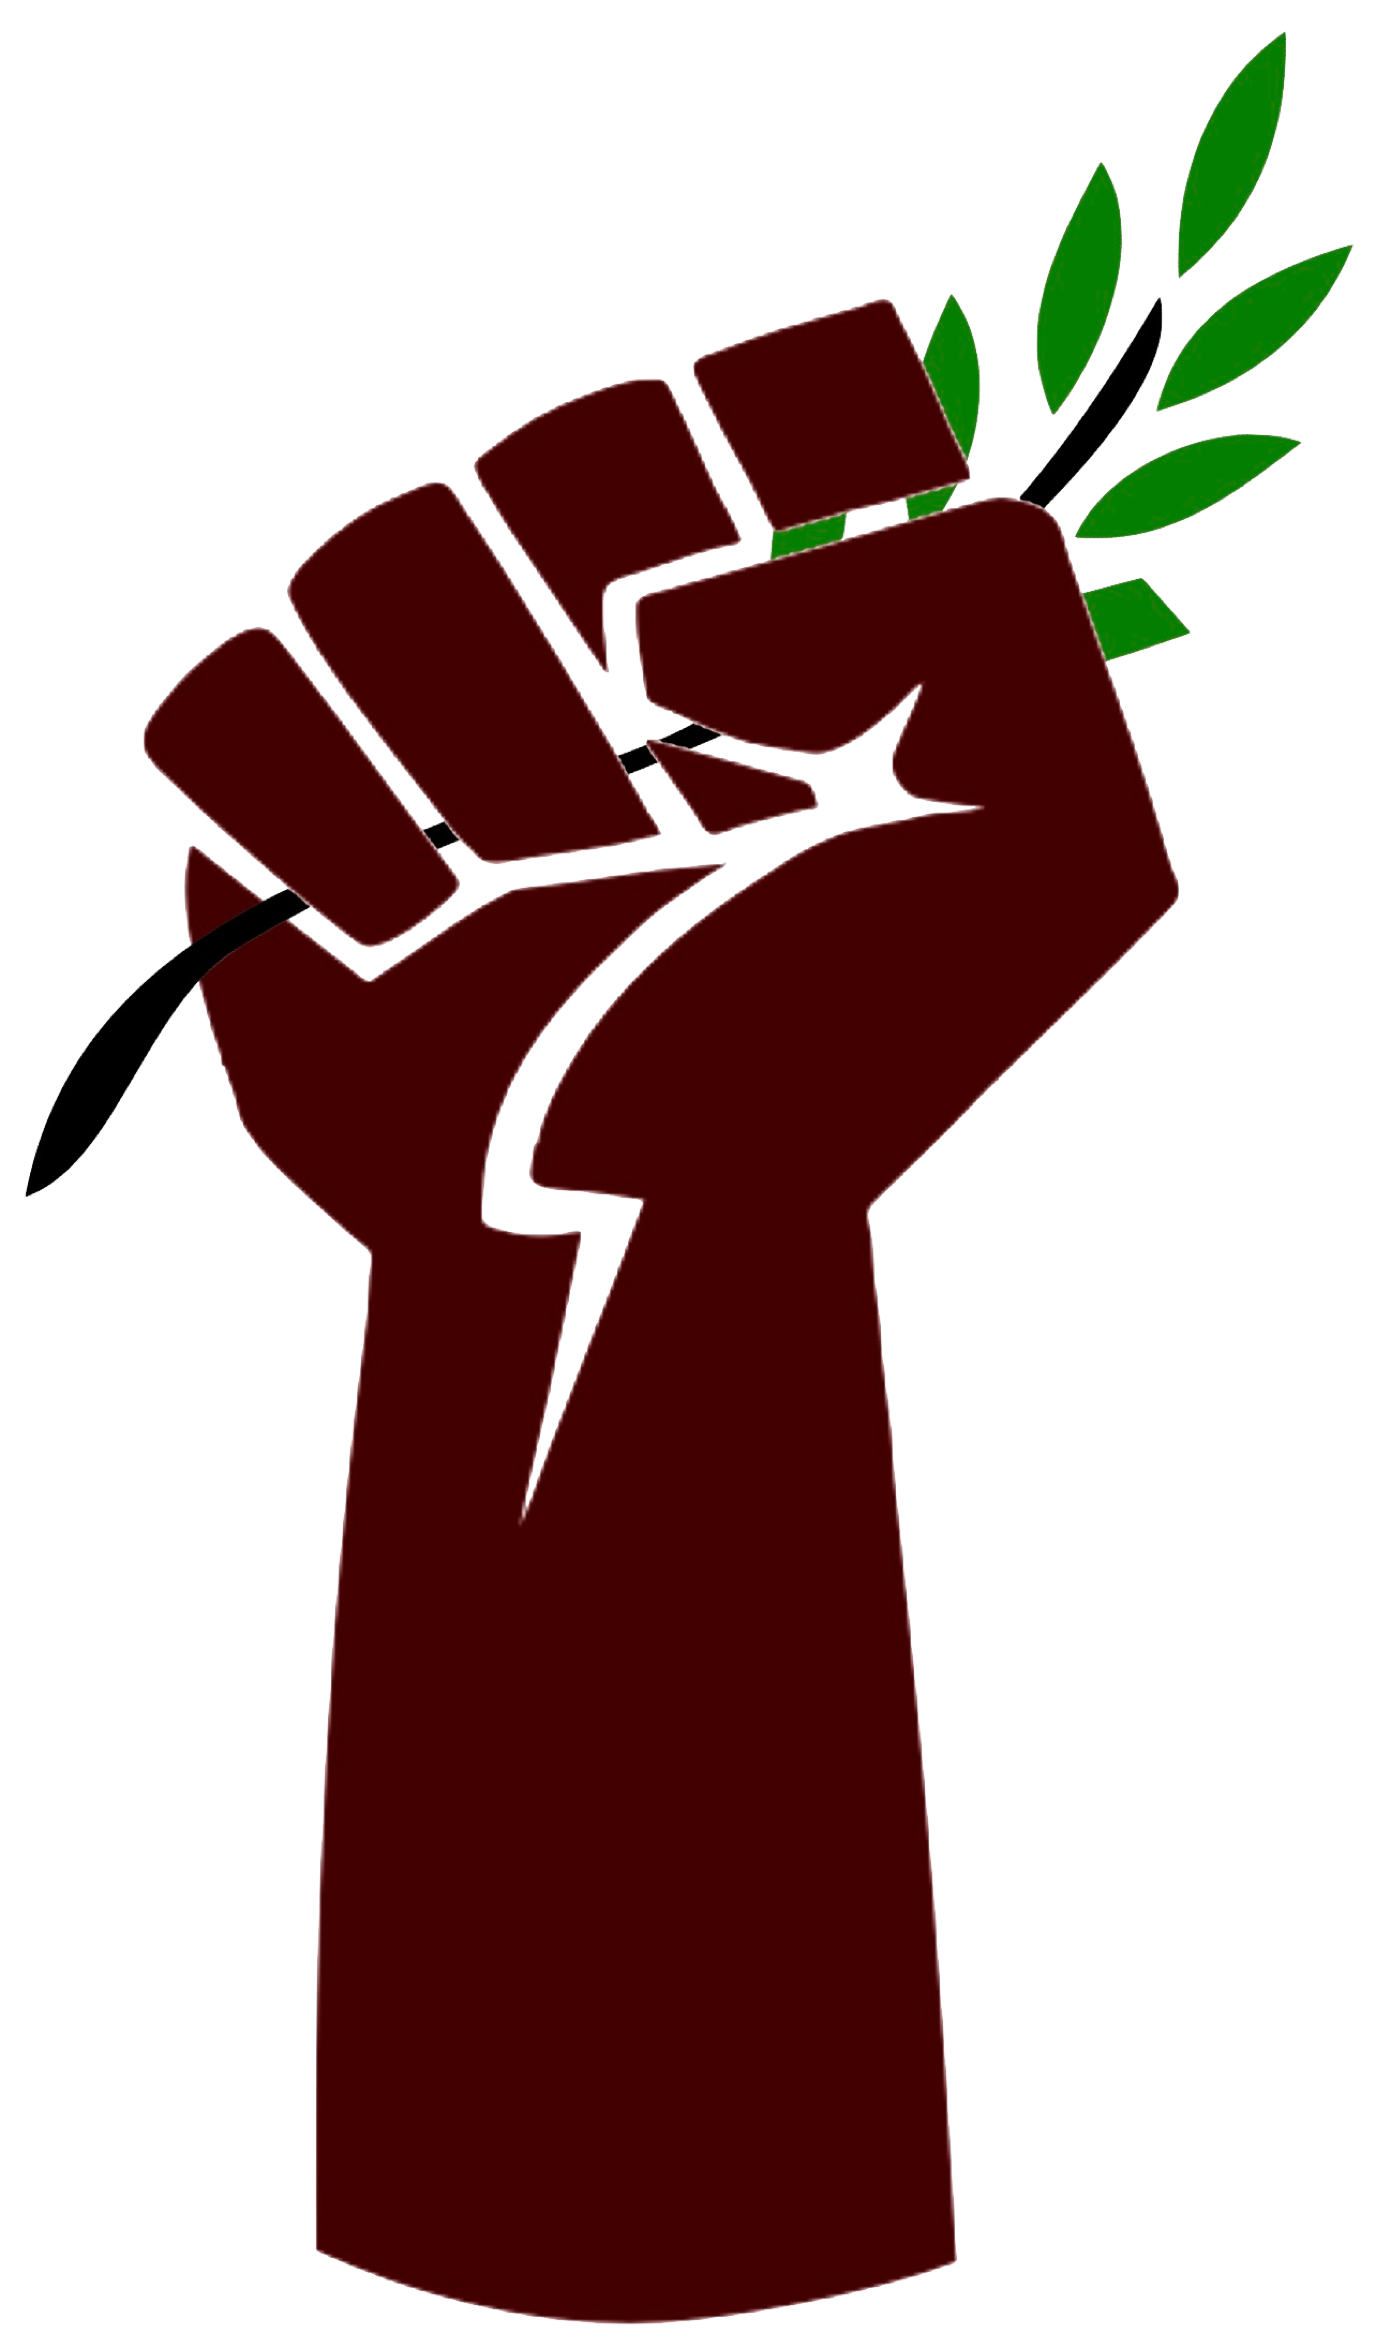 An image of a fist clutching an olive branch, together symbolizing the perpetual struggle for justice and the universal human desire for peace.